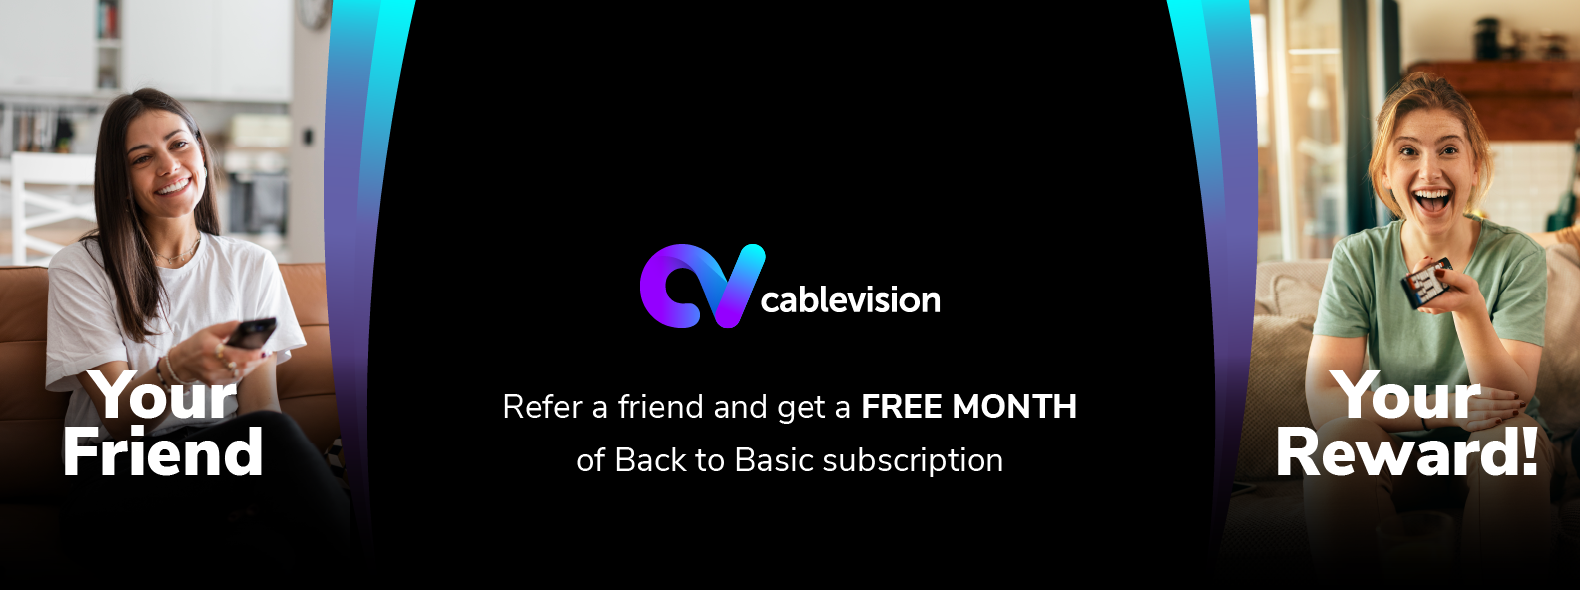 Refer a Friend and Get 1 month FREE